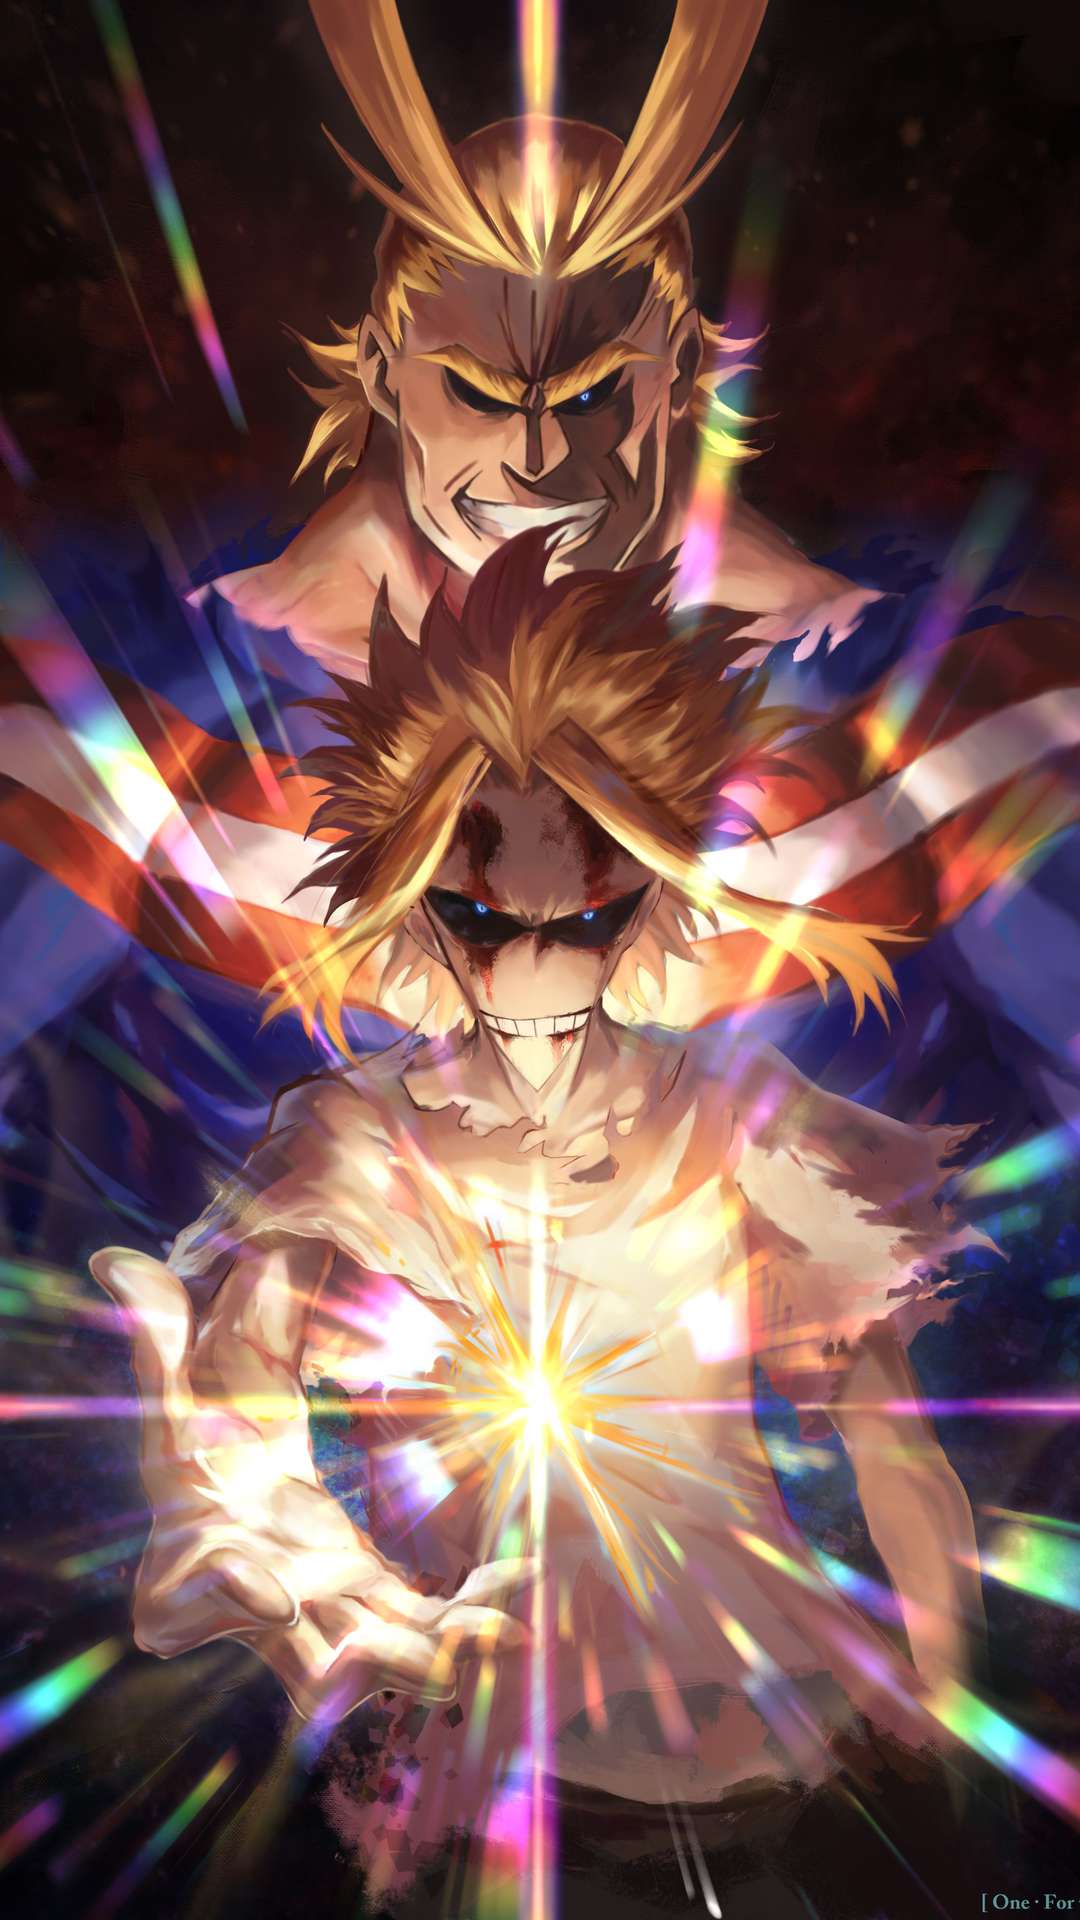 Wallpaper ID 320988  Anime My Hero Academia Phone Wallpaper All Might  1440x2960 free download